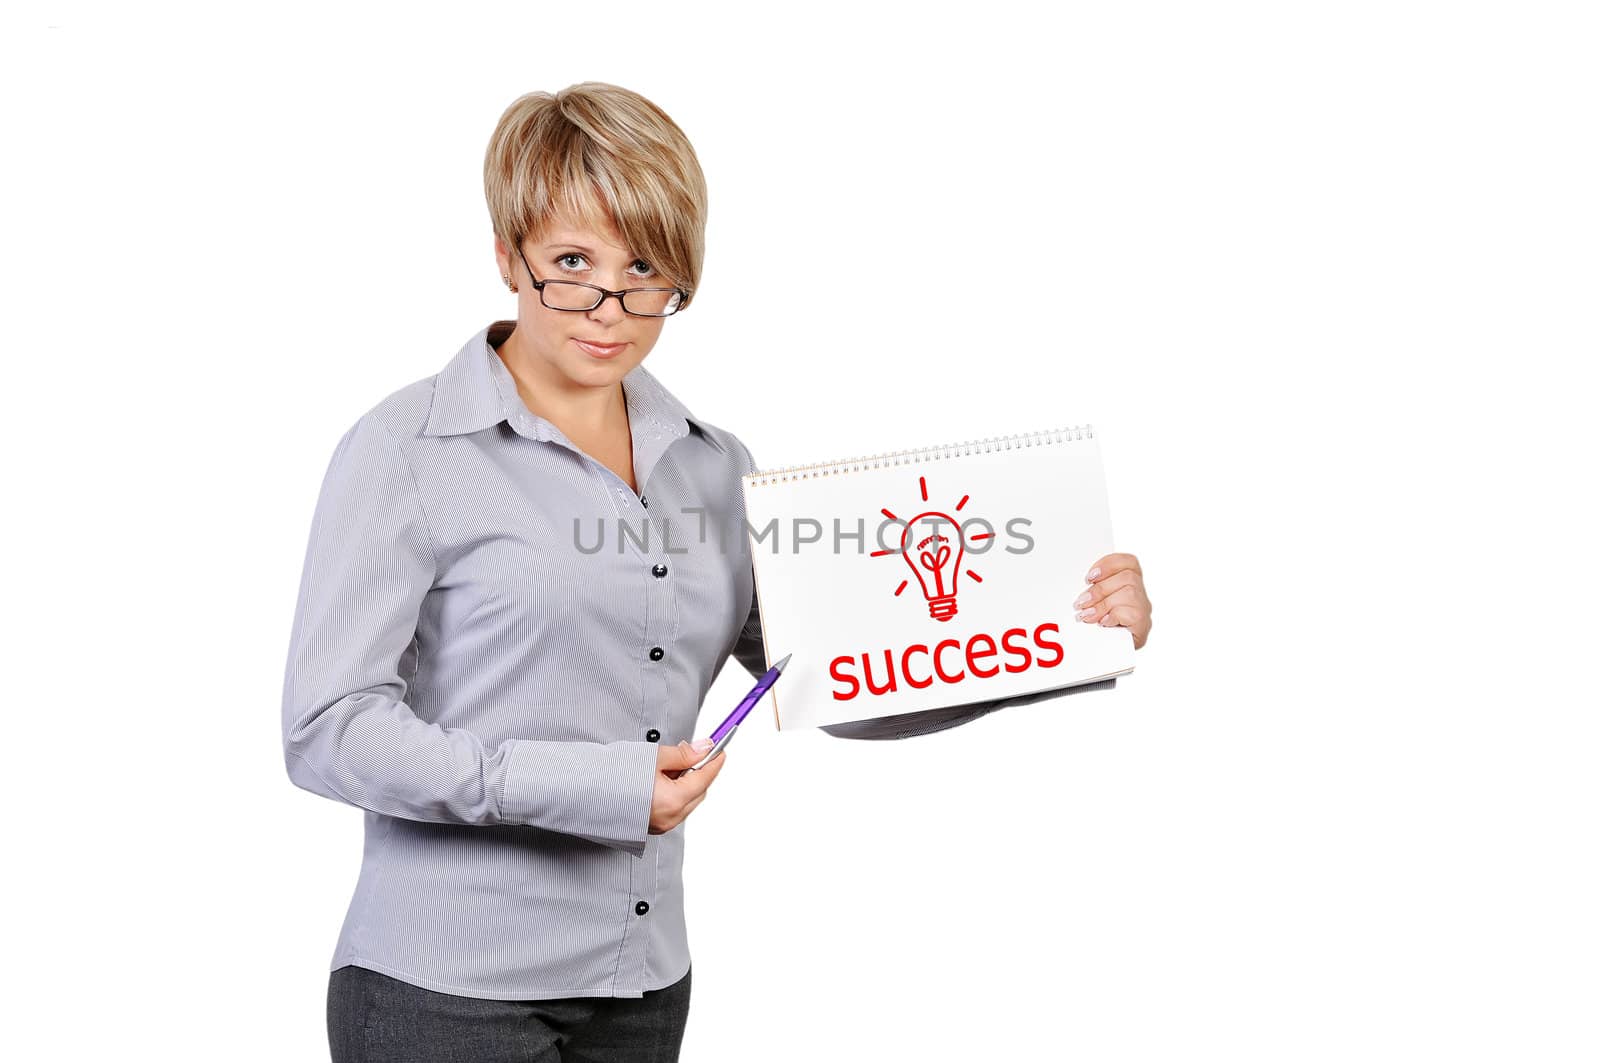 Woman holding a placard with success